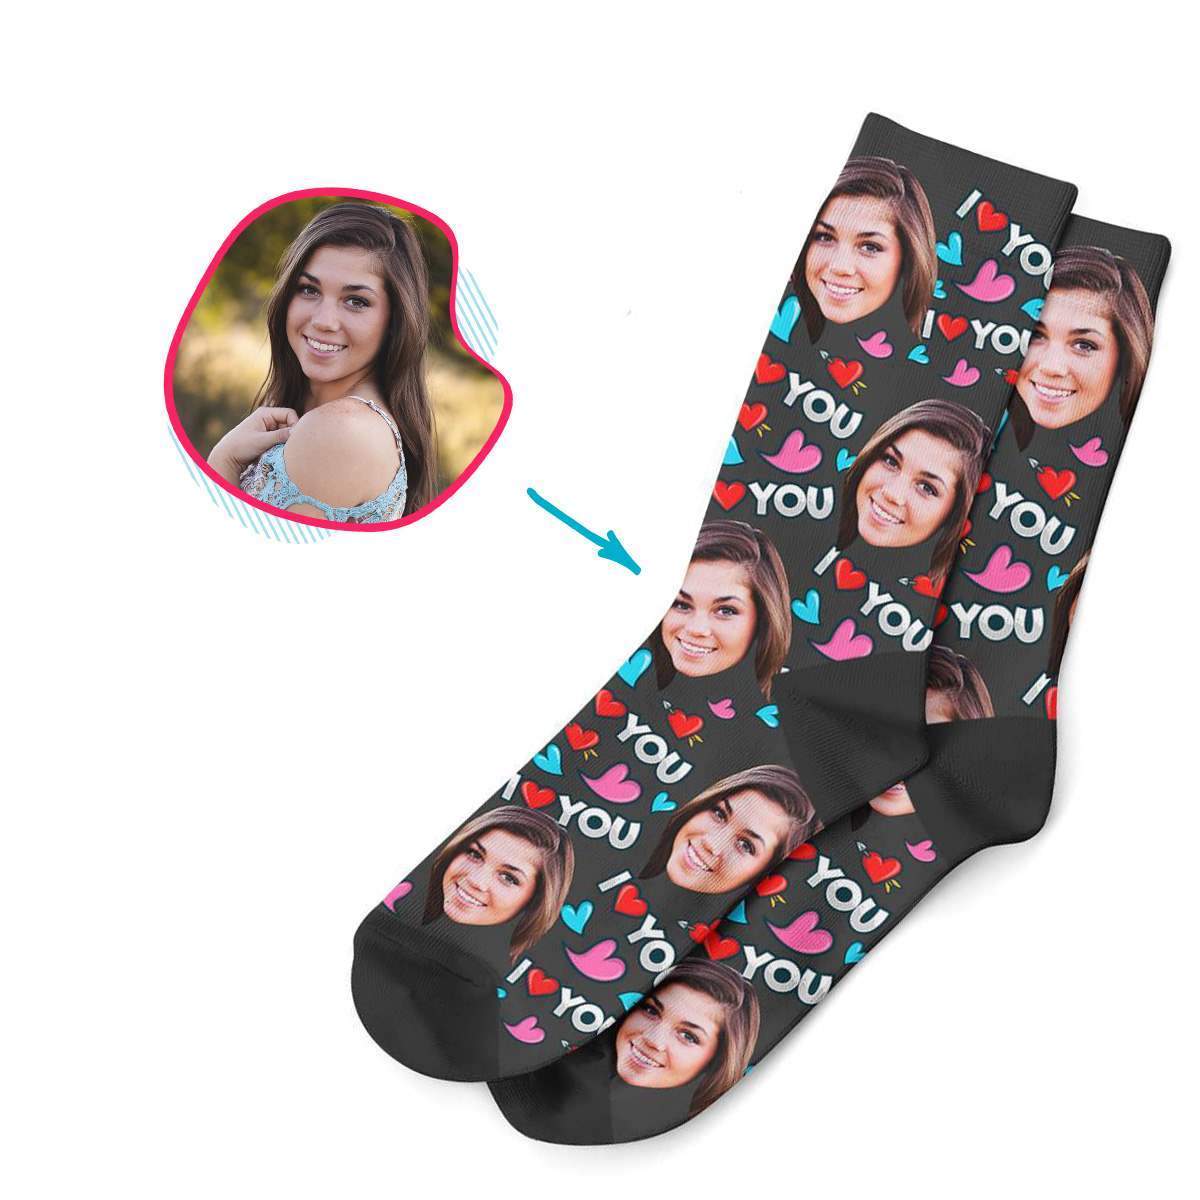 dark Love You socks personalized with photo of face printed on them